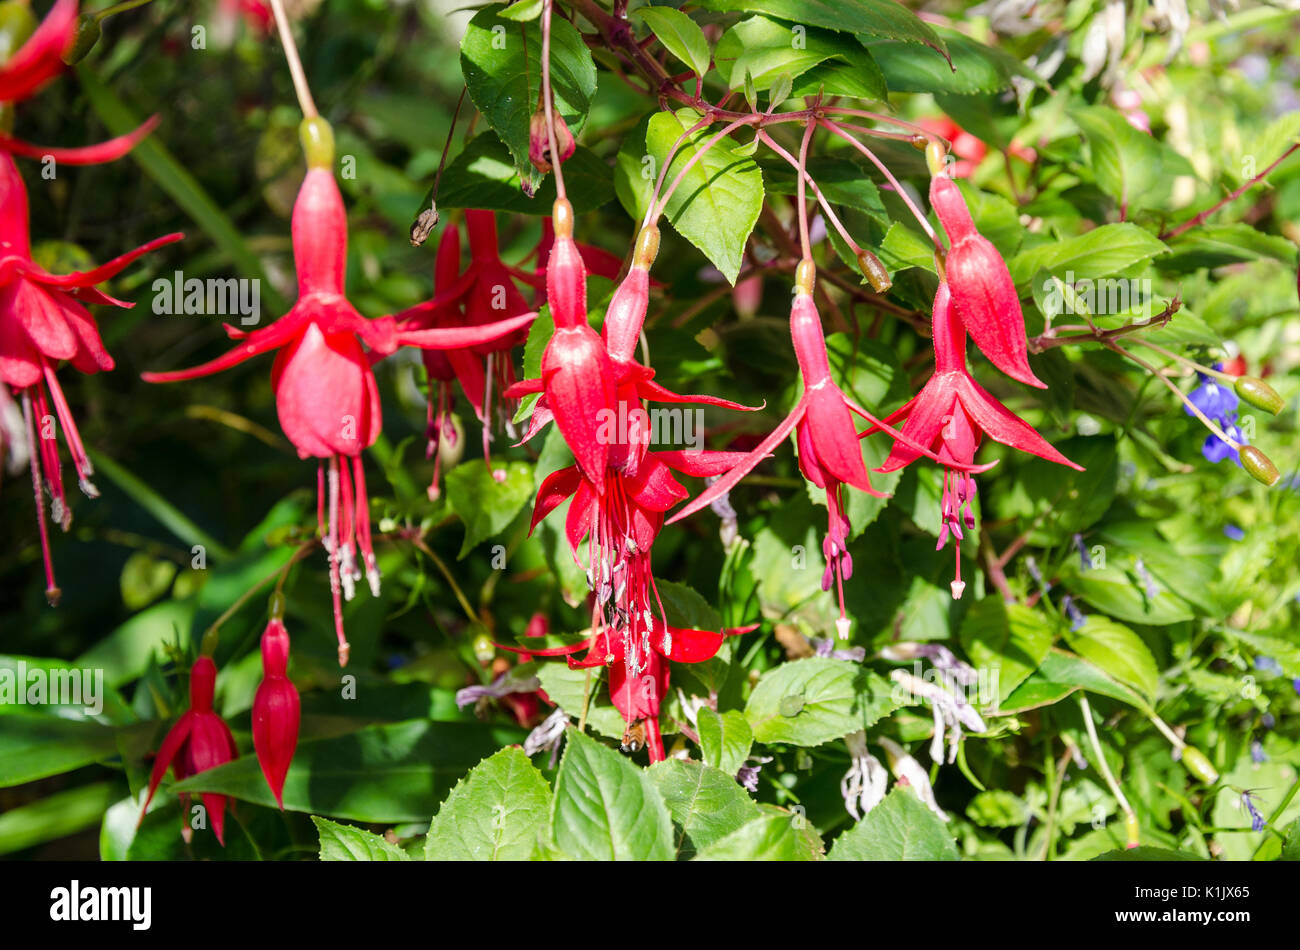 Close up view of fuchsia flowers Stock Photo